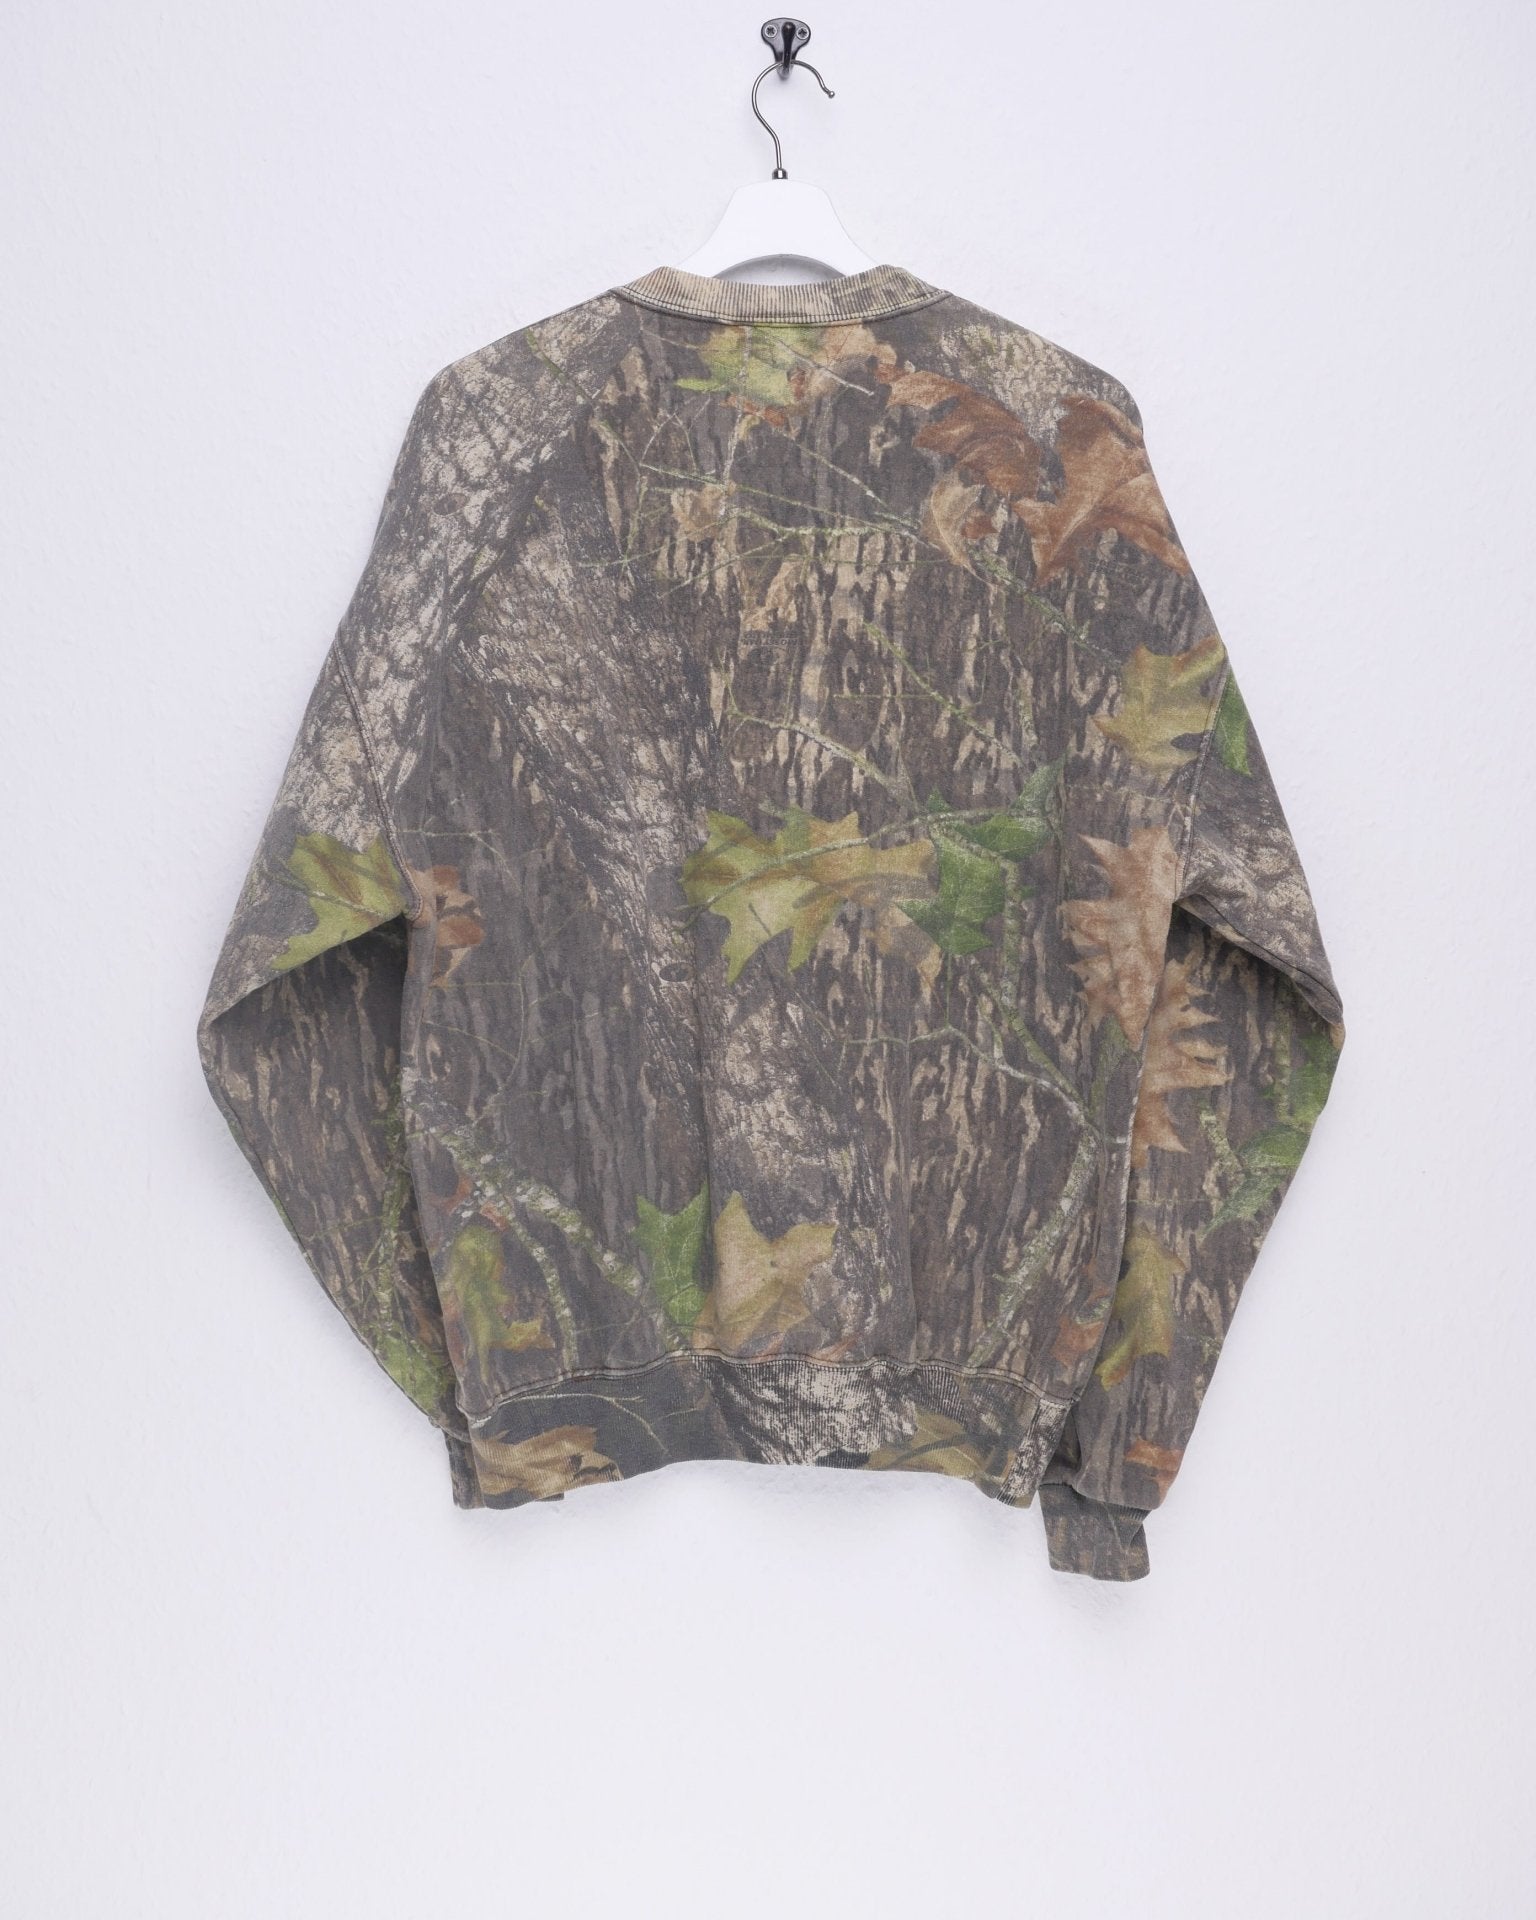 jerzees 'Hunting Gear' printed Pattern multicolored Sweater - Peeces